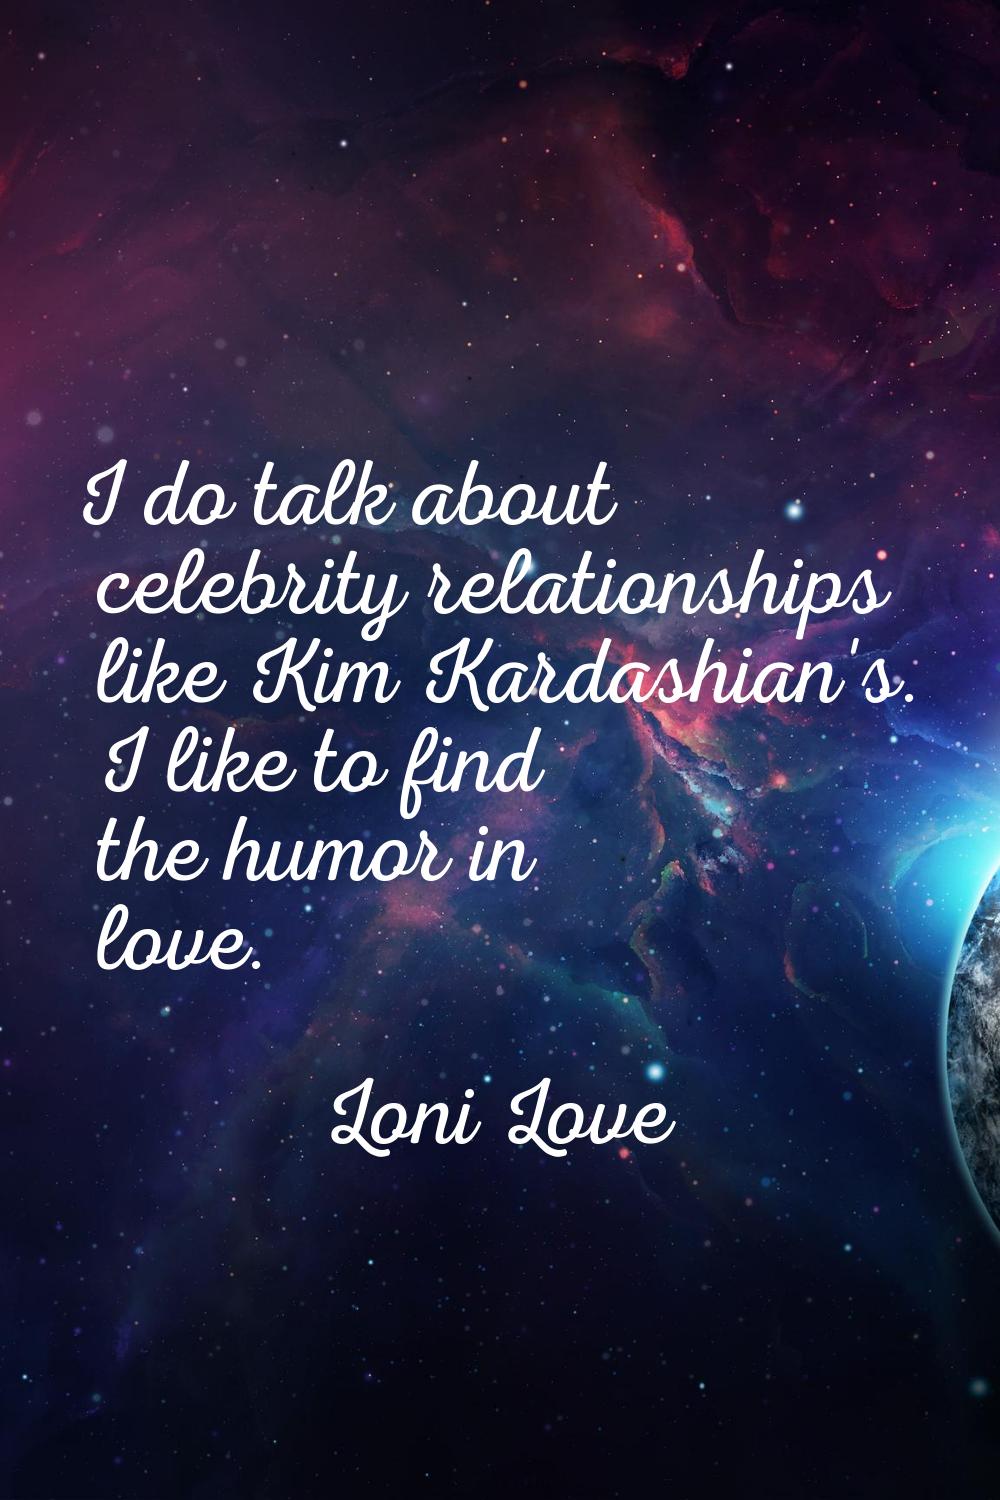 I do talk about celebrity relationships like Kim Kardashian's. I like to find the humor in love.